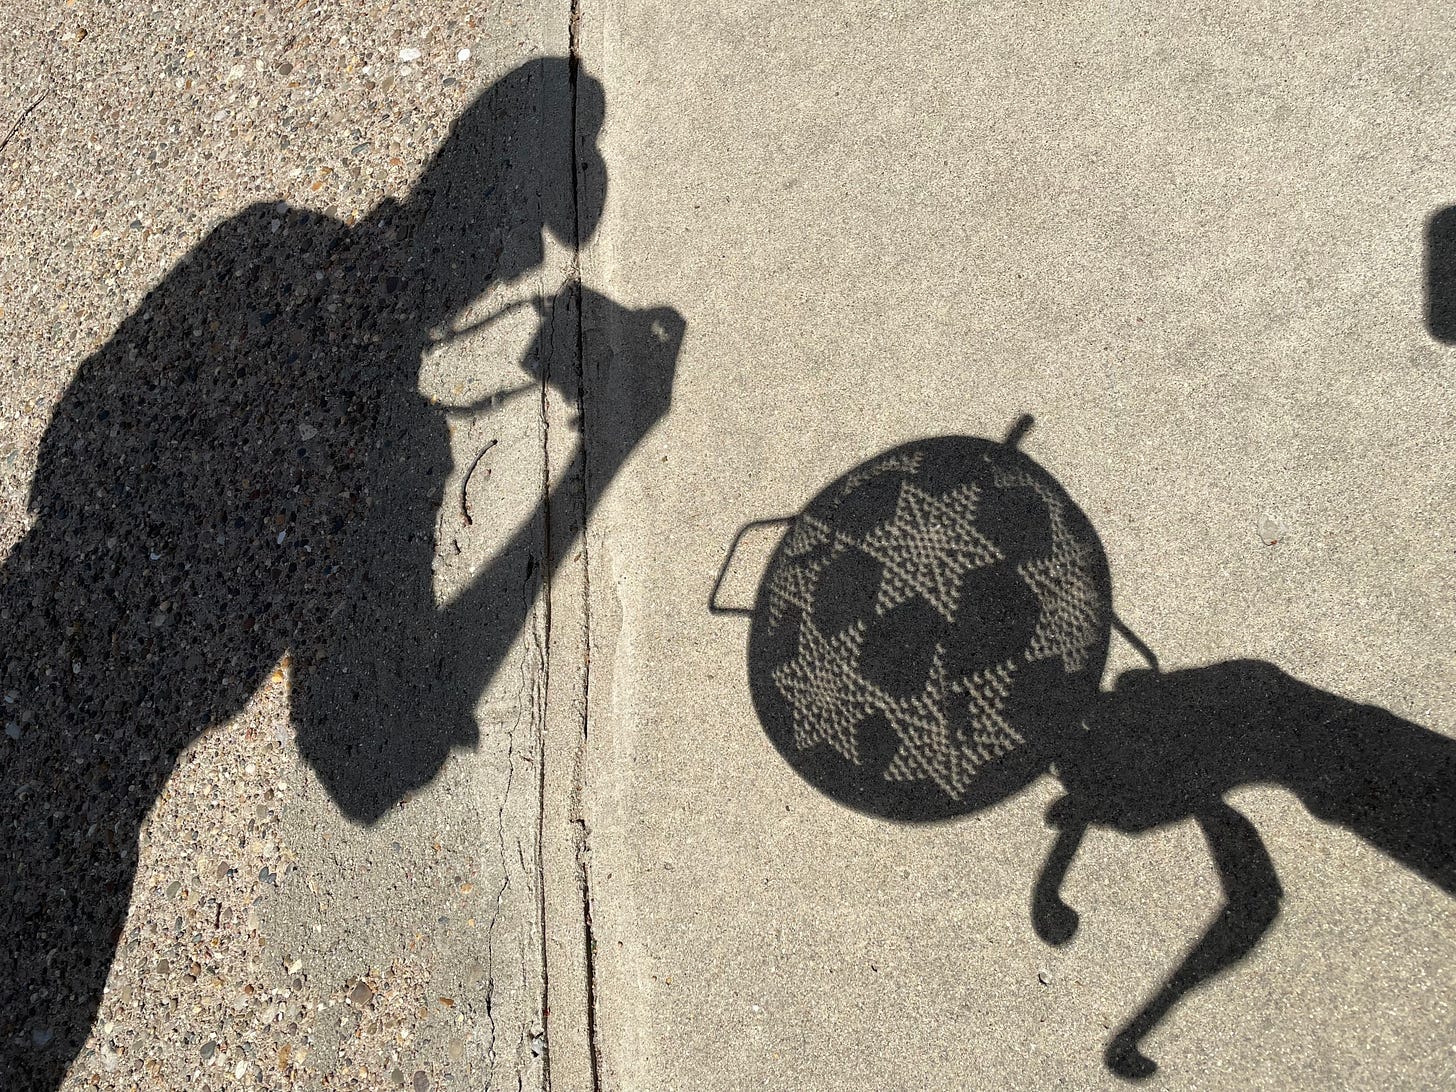 Shadows of a man taking a picture and a hand holding a colander